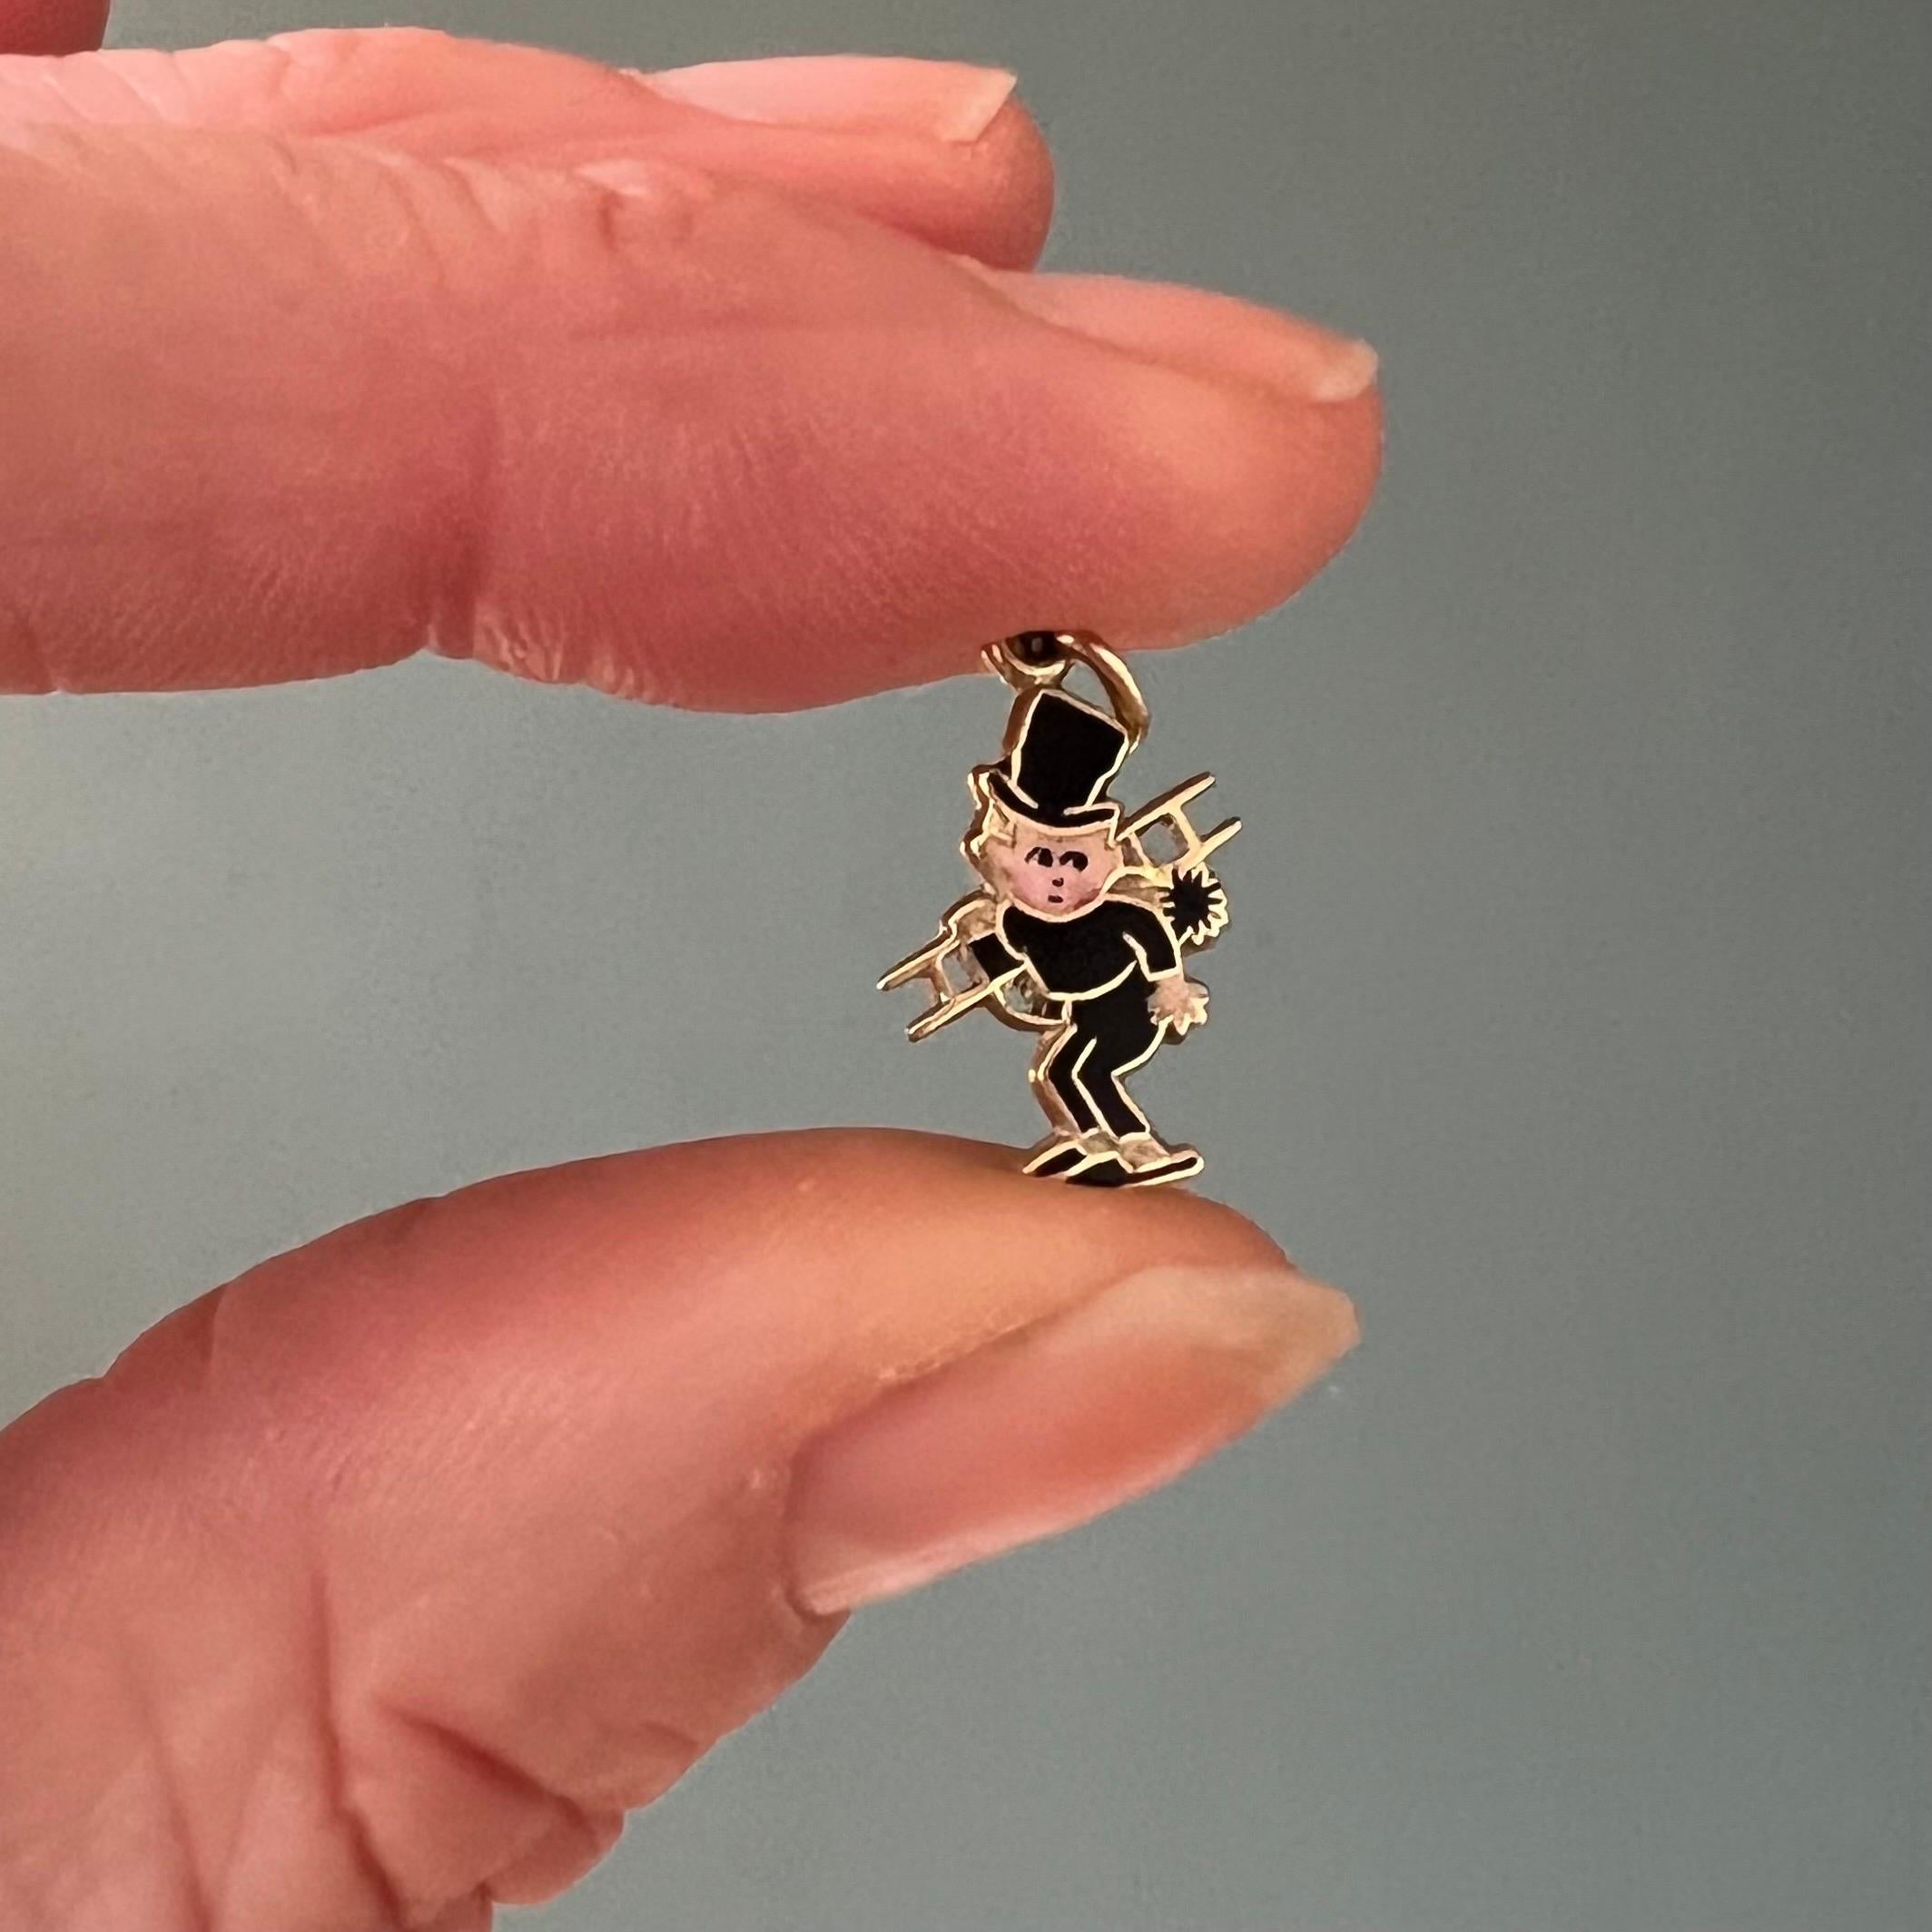 This is a 14 karat gold vintage enamel charm pendant crafted in the shape of a chimney sweeper. This cute little chimney sweeper is nicely detailed with black and white enamel throughout his body.

Charms are great to collect as wearable memories,